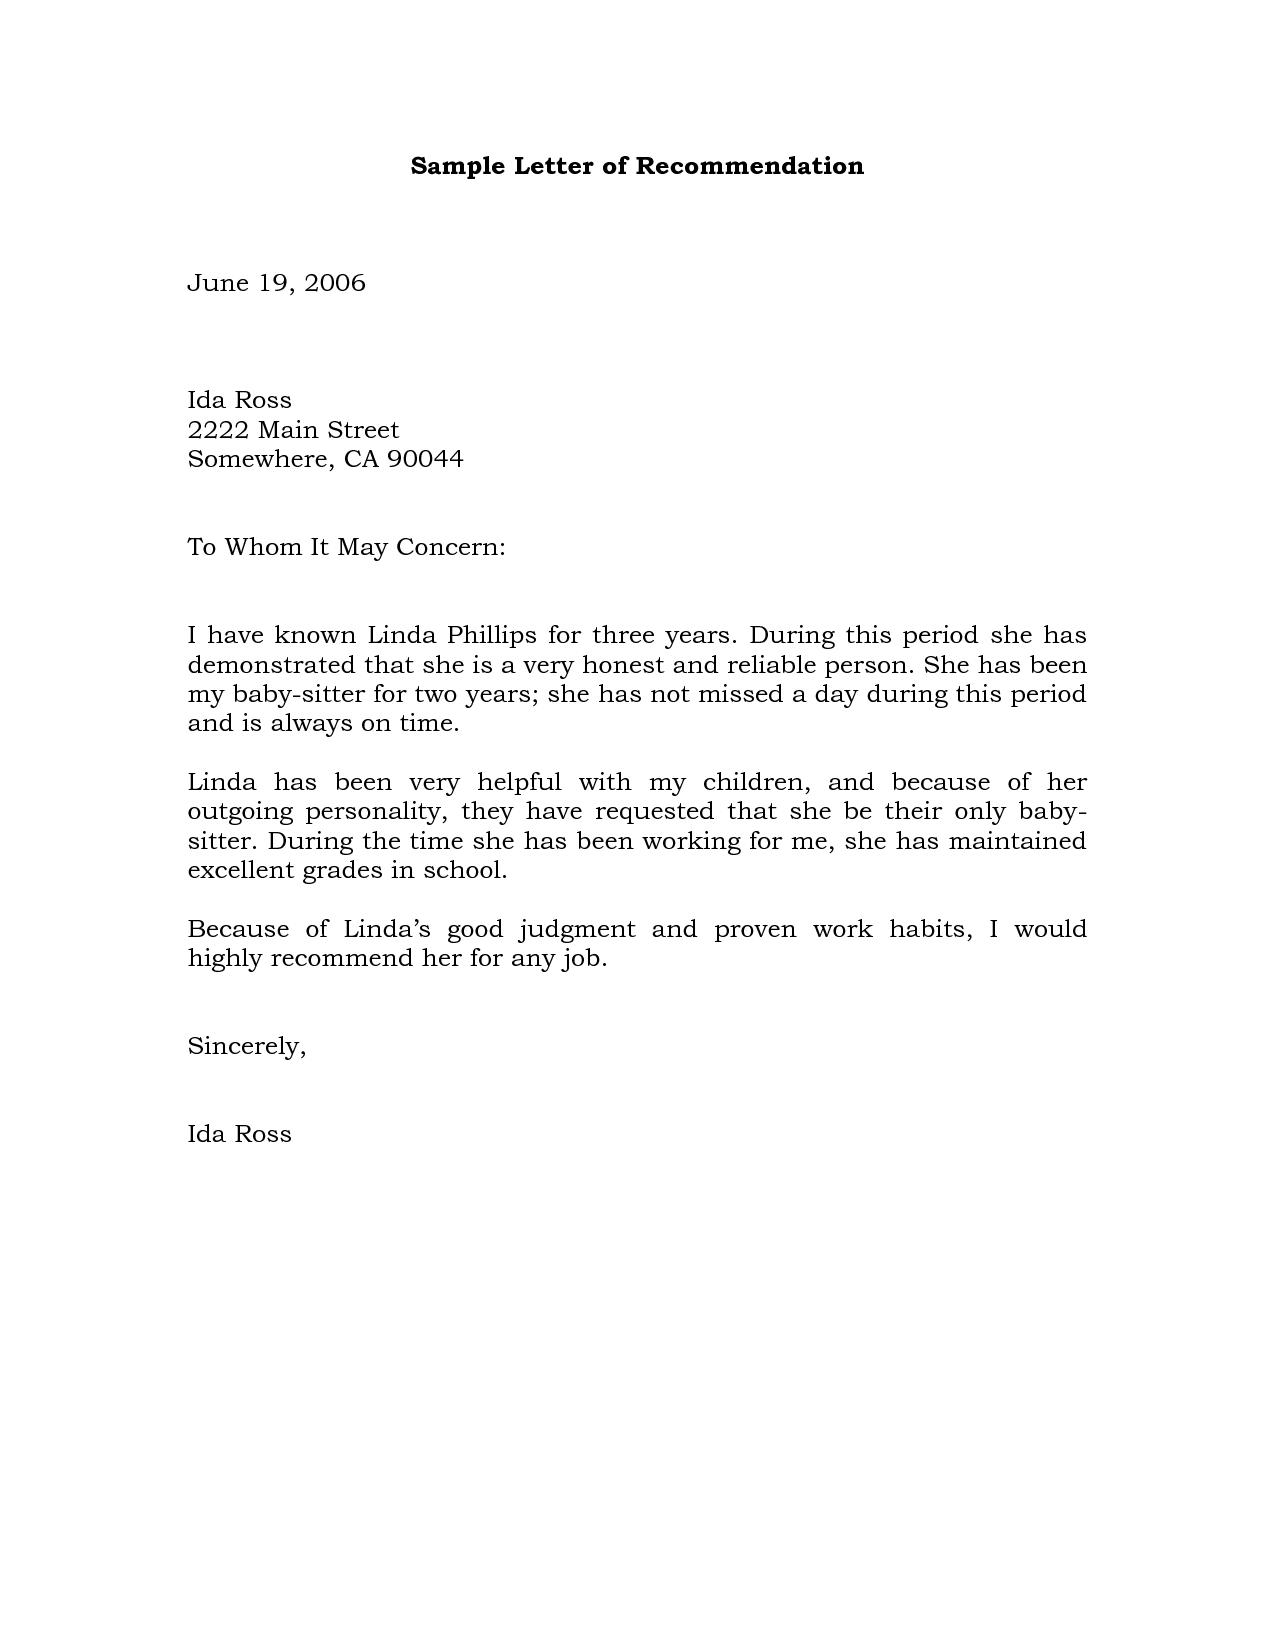 Personal Character Reference Letter Template - Business Re Mendation Letter Template Acurnamedia